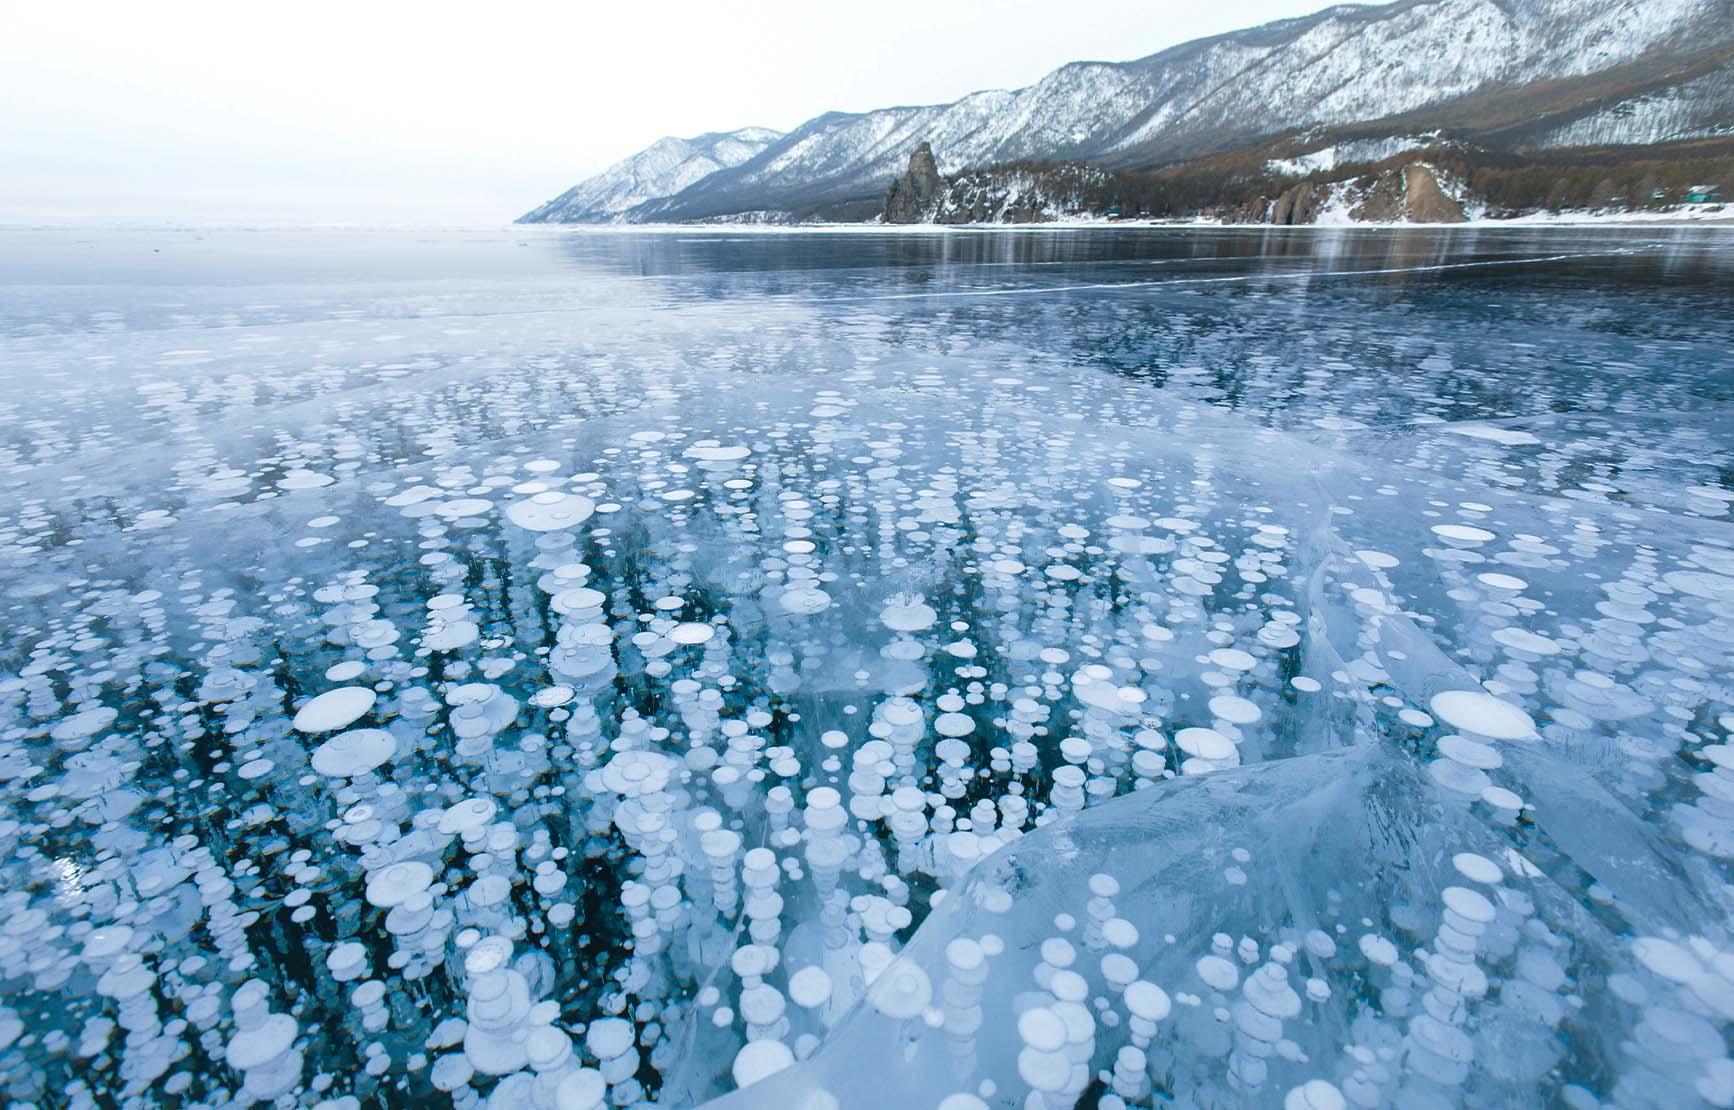 Methane bubbles frozen in the ice of Lake Baikal